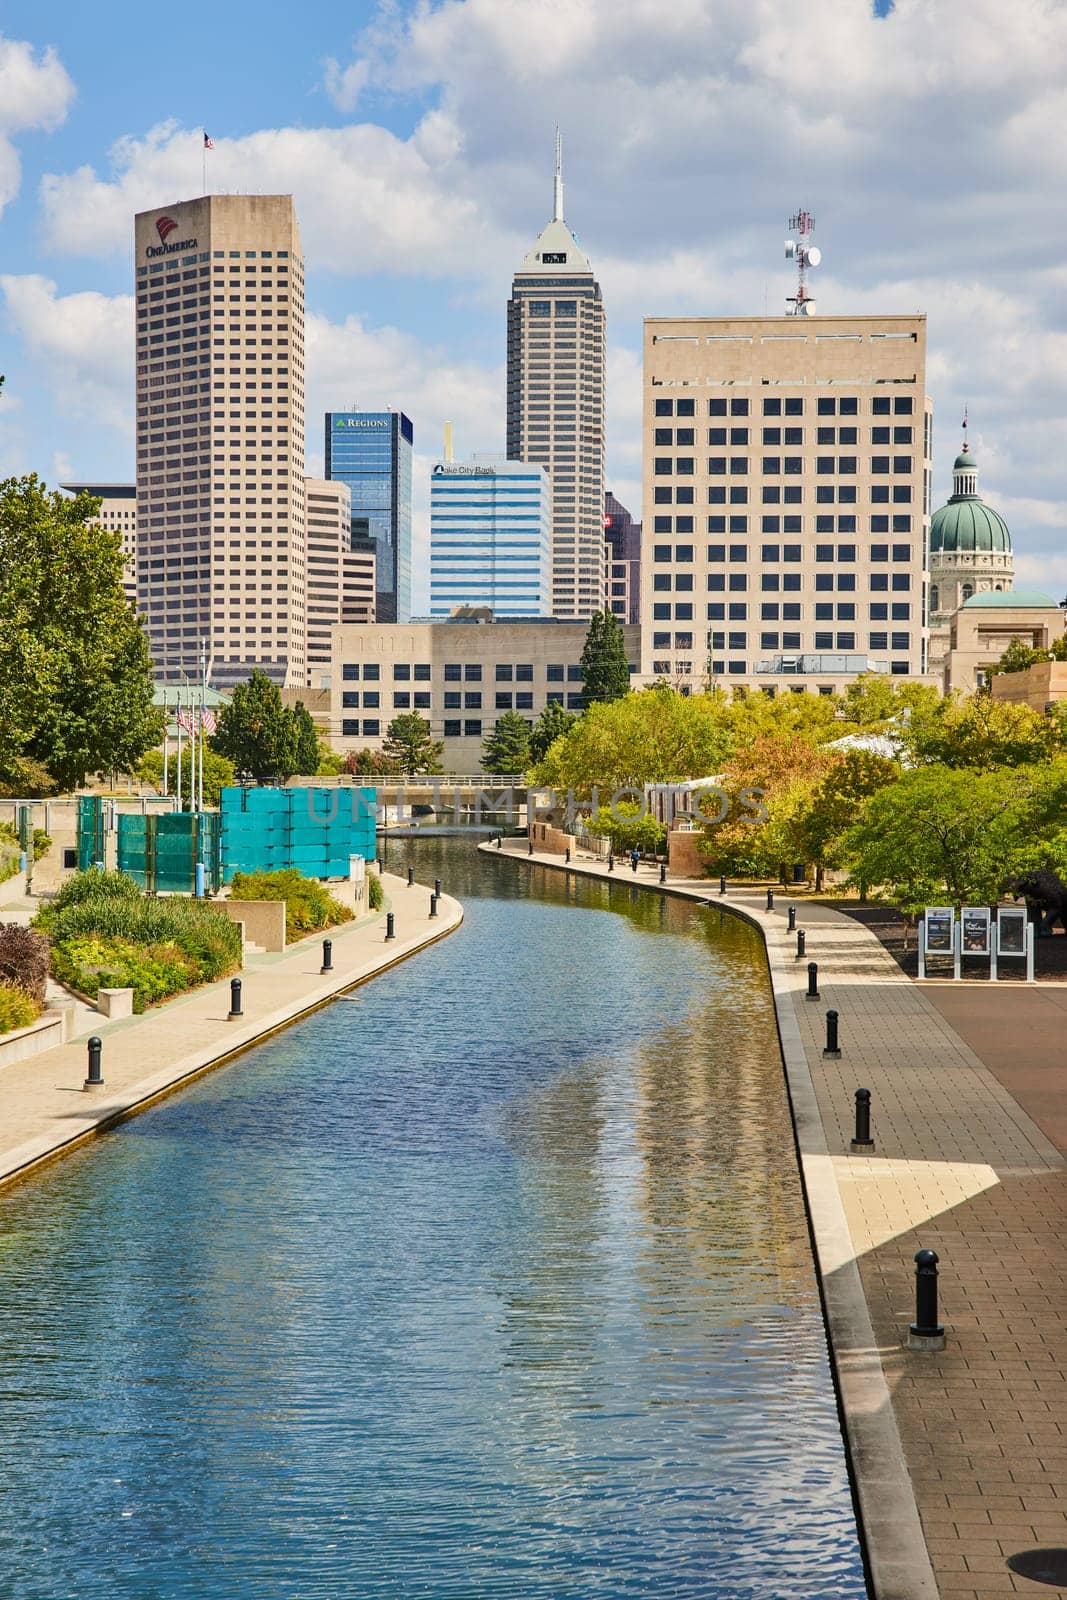 Sunlit Canal and Skyline in Downtown Indianapolis by njproductions